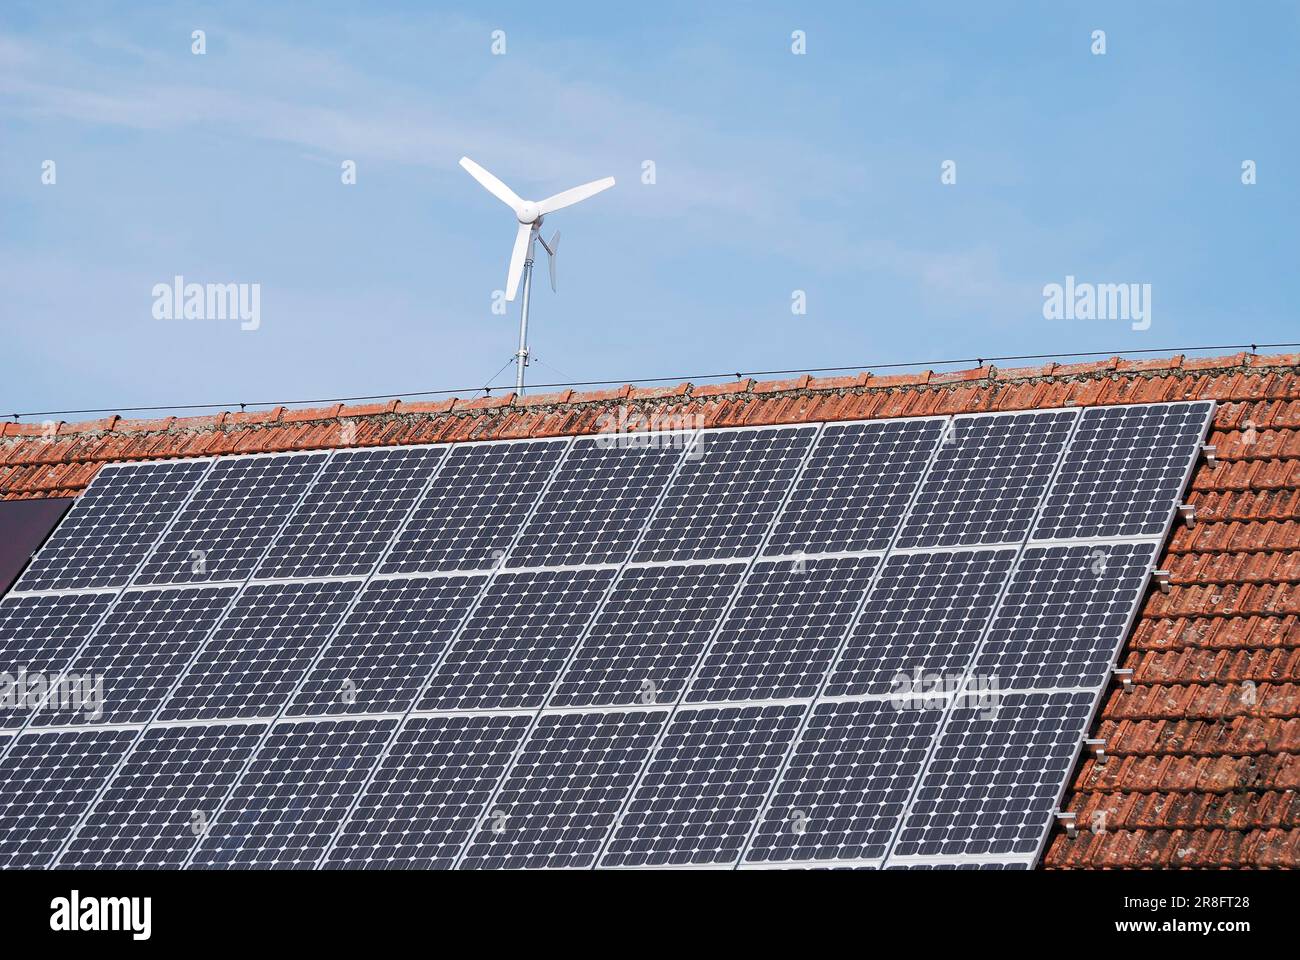 Alternative energy with solar panels and a wind engine Stock Photo